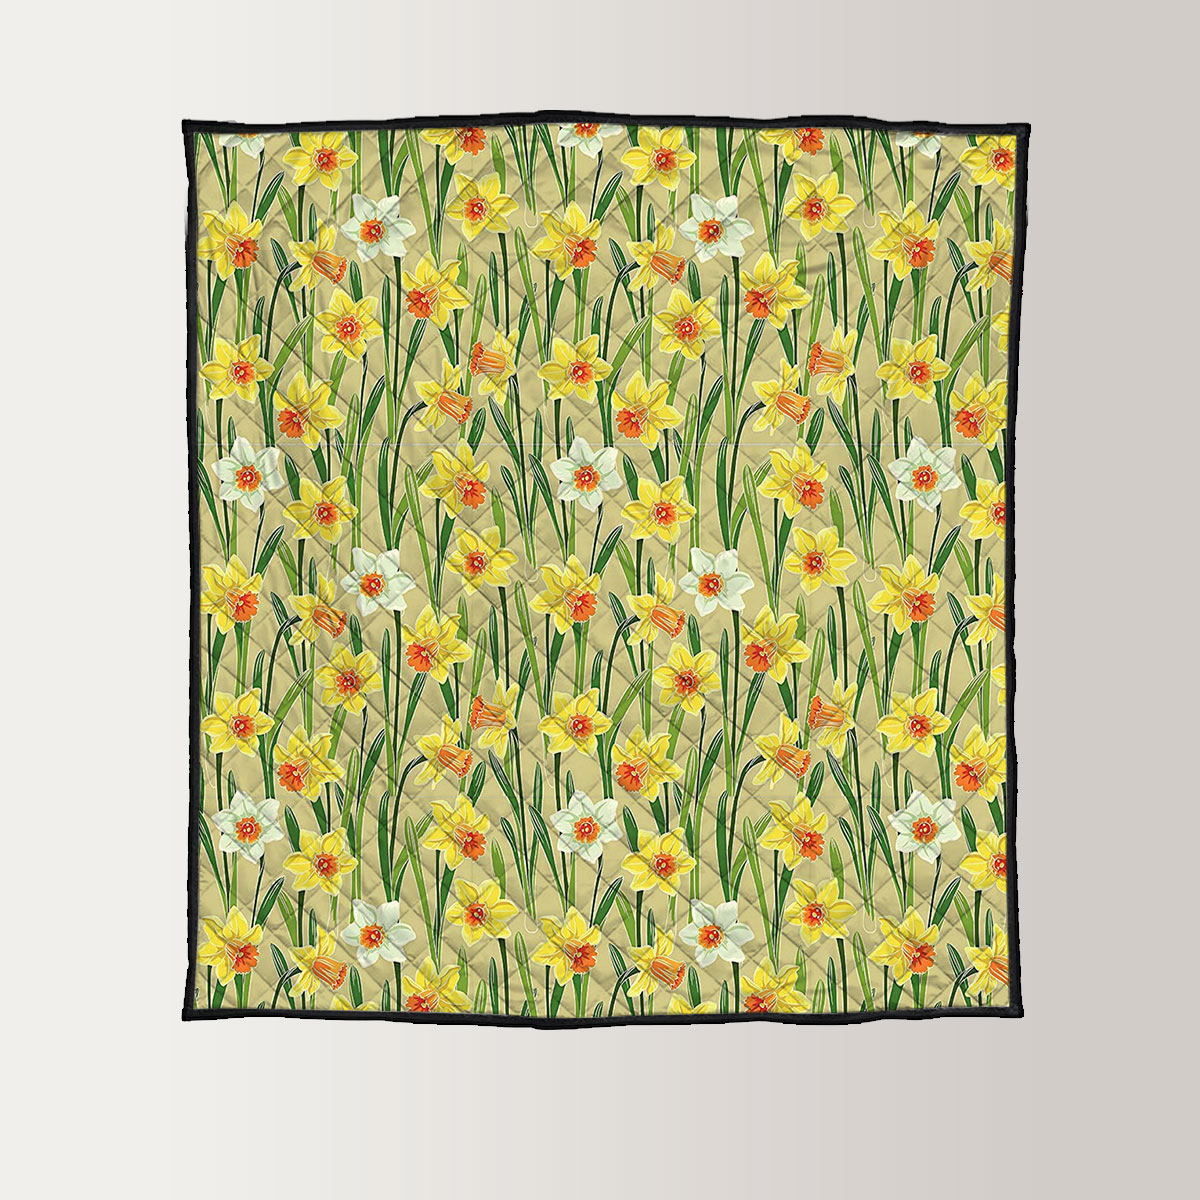 Yellow Jonquil Daffodil Narcissus Quilt